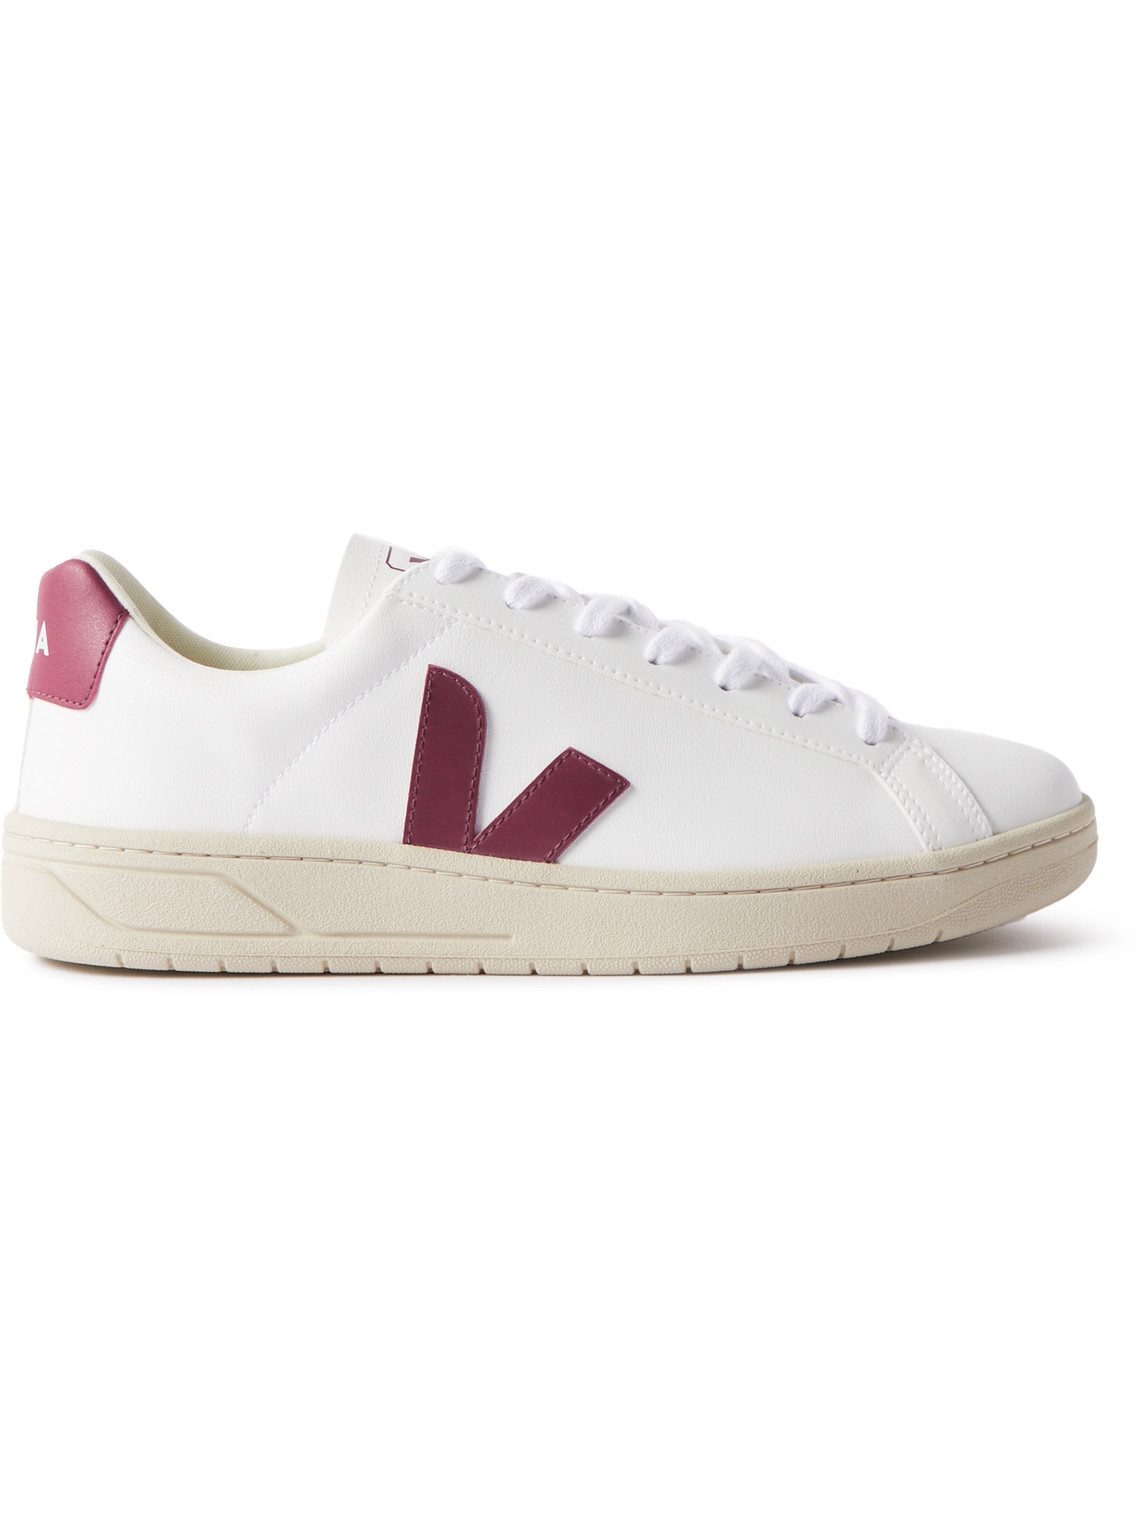 Veja Urca Faux Leather Sneakers